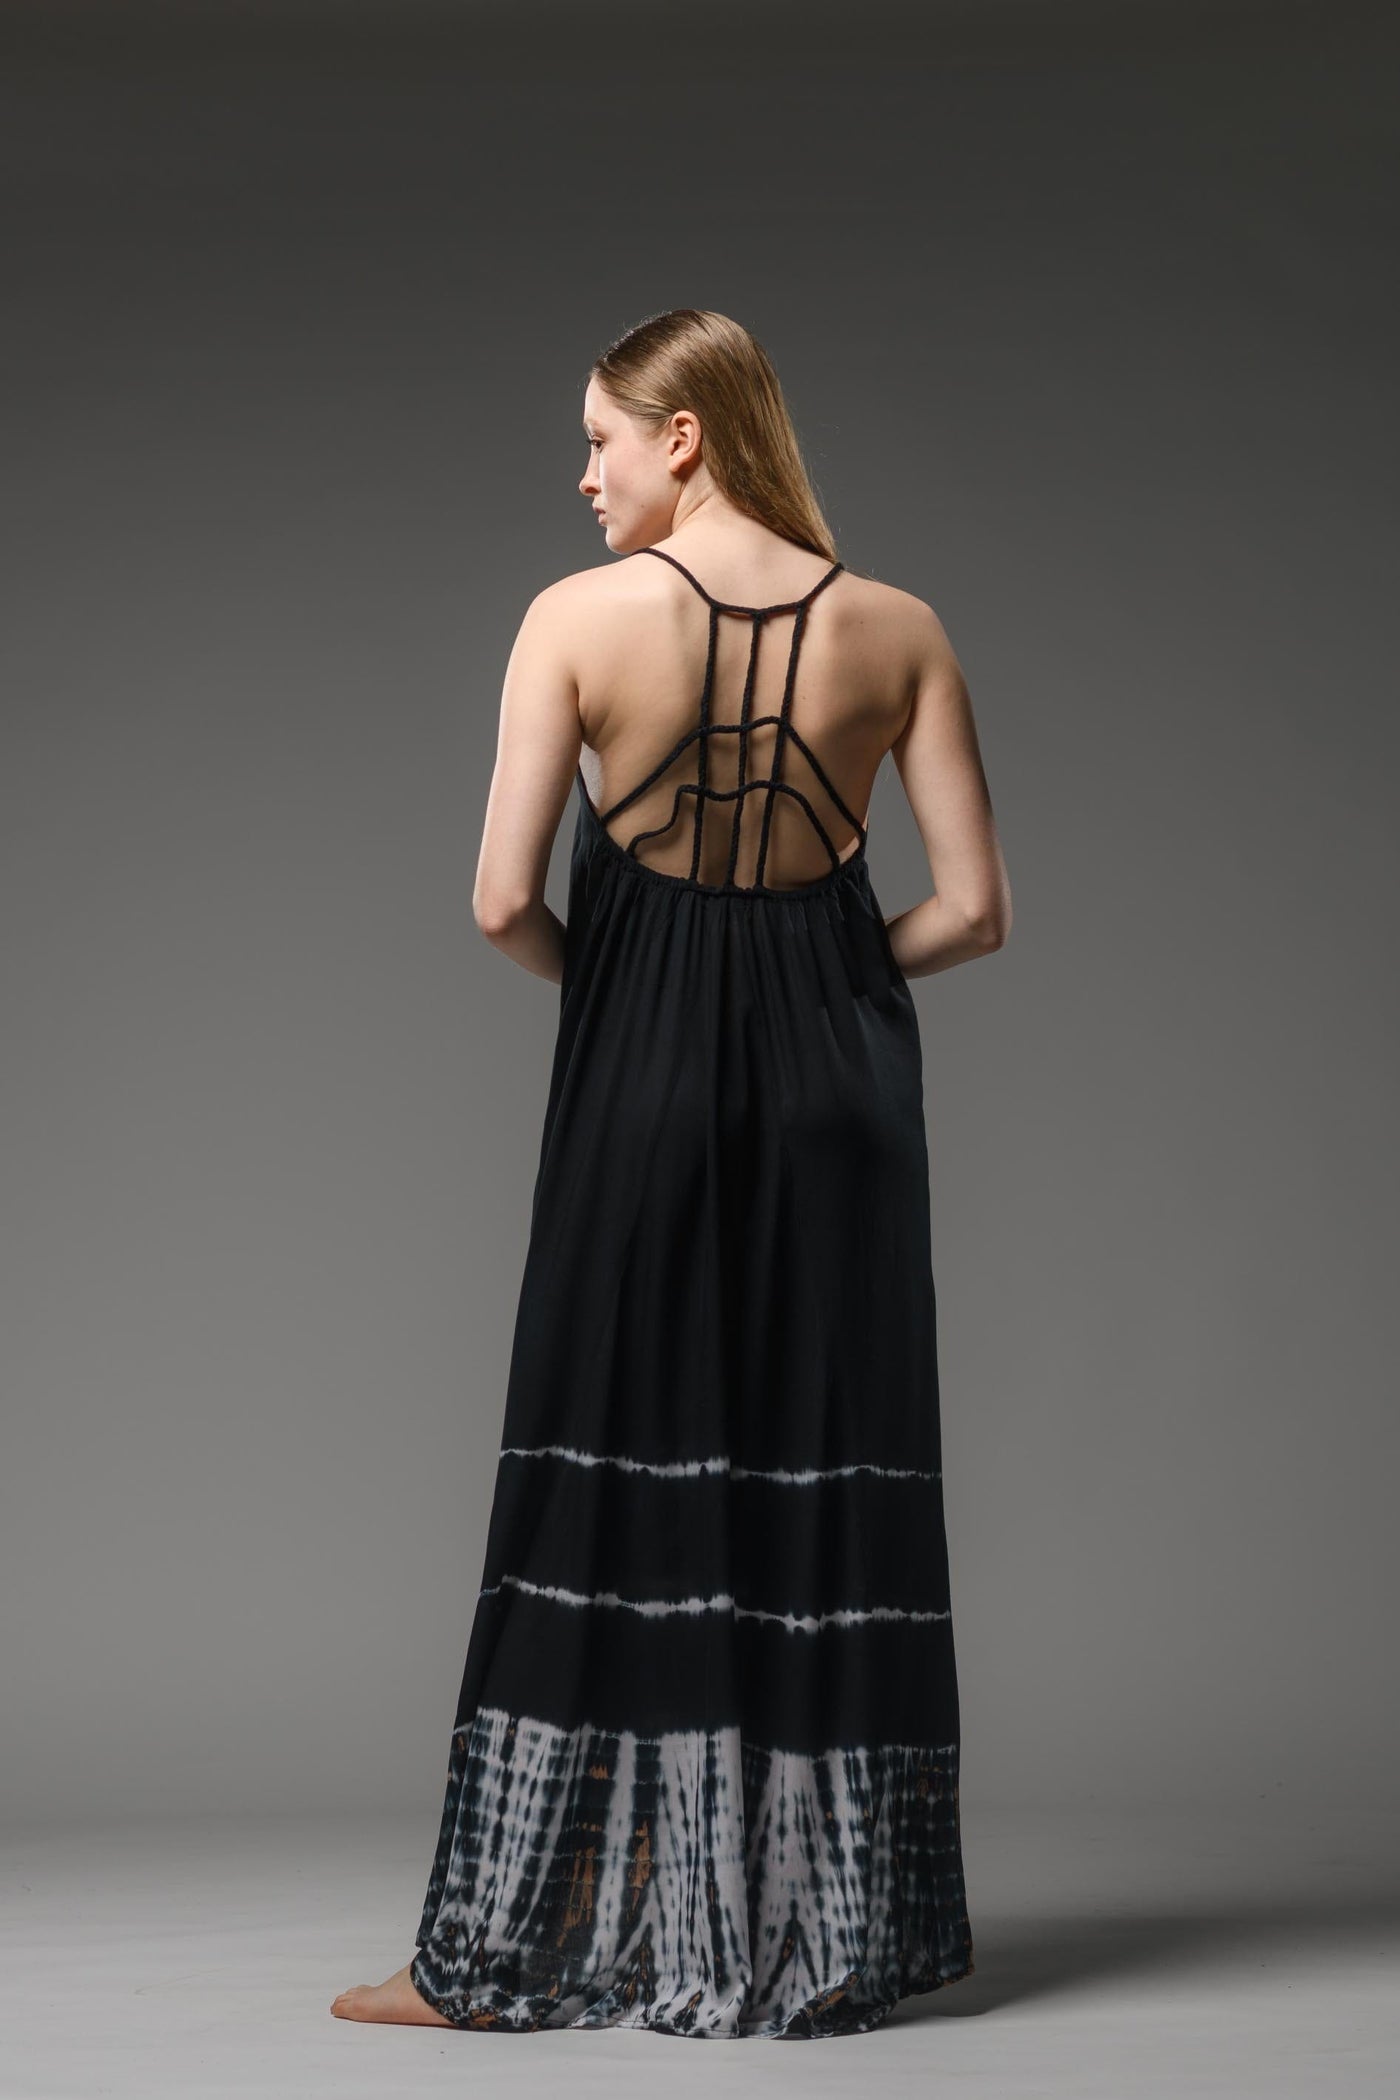  Elegant resort wear black tie dye soft rayon dress. Hand knitted braided cord ropes made of the same fabric, create a special detail net in the back.